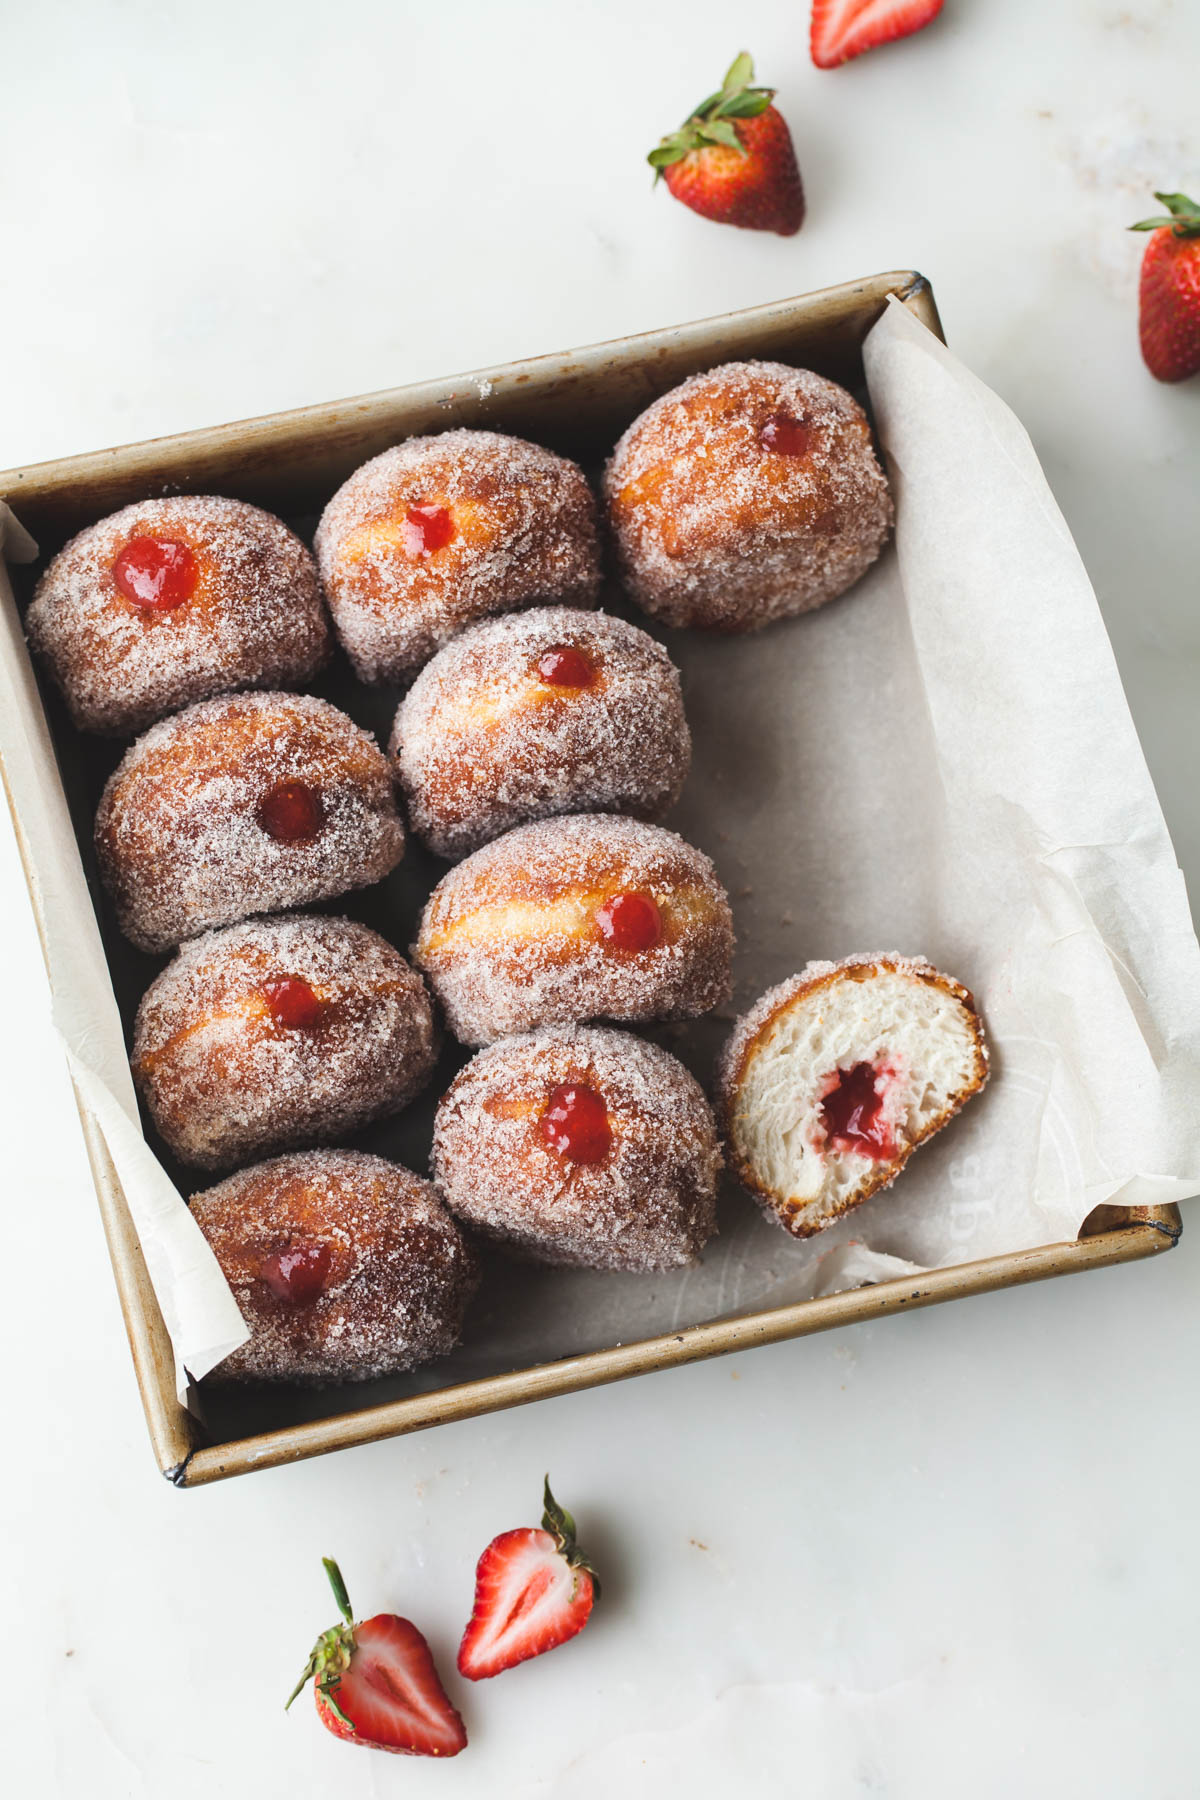 A tray of cinnamon-sugar coated donuts with strawberry rhubarb jelly filling